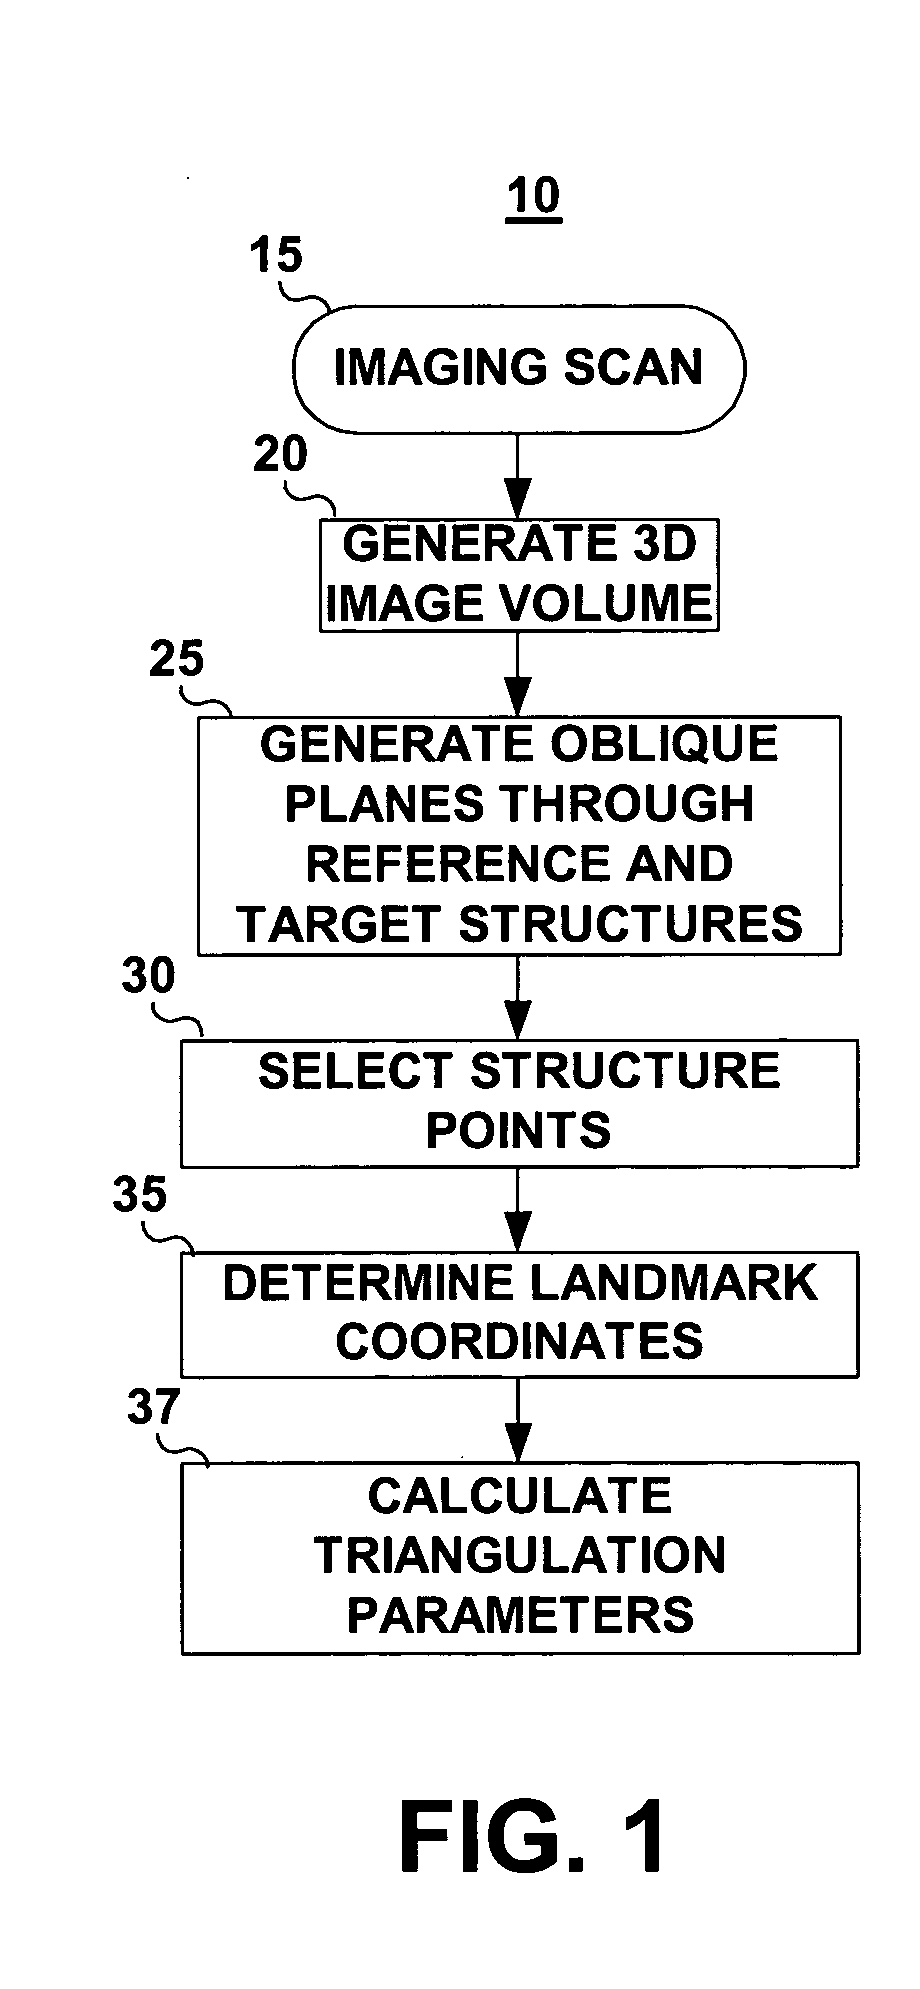 Clinical tool for structure localization